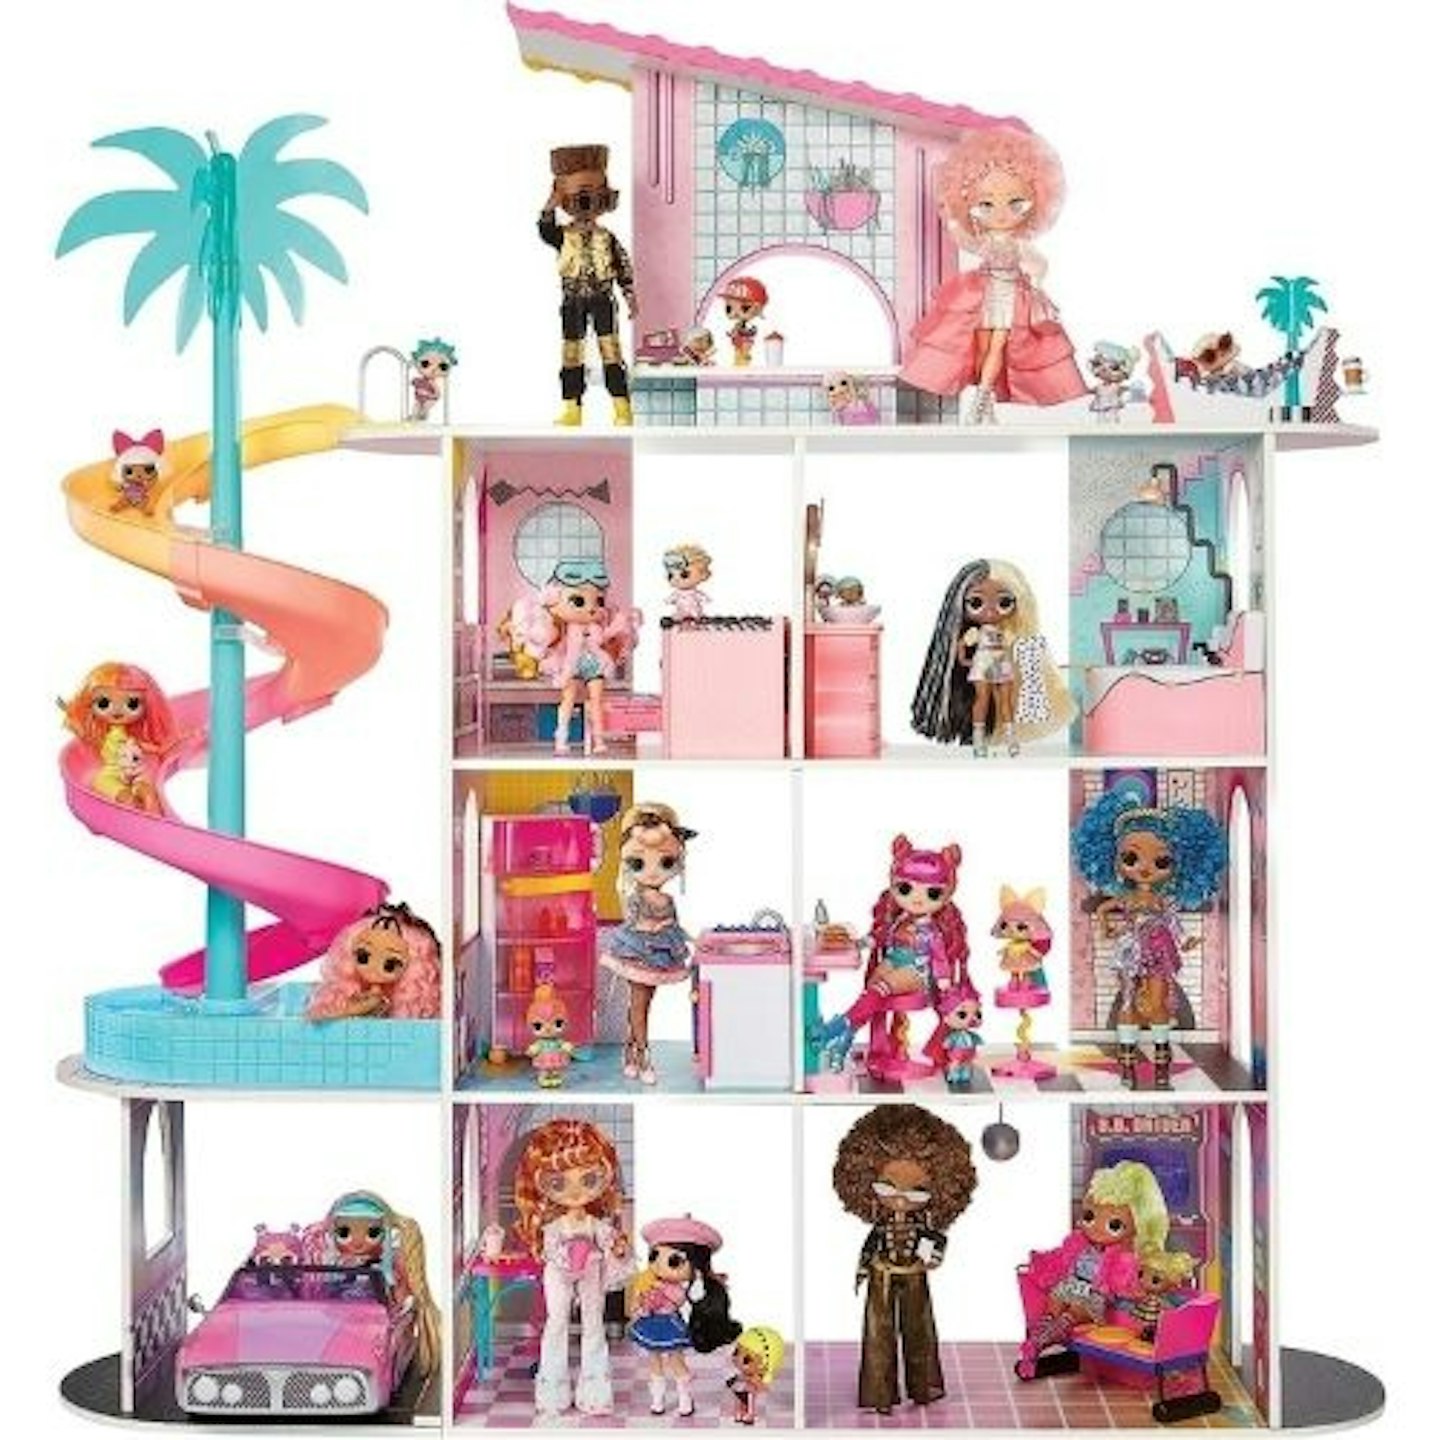 Top Christmas Toys: L.O.L. Surprise OMG Fashion House Playset with 85+ Surprises